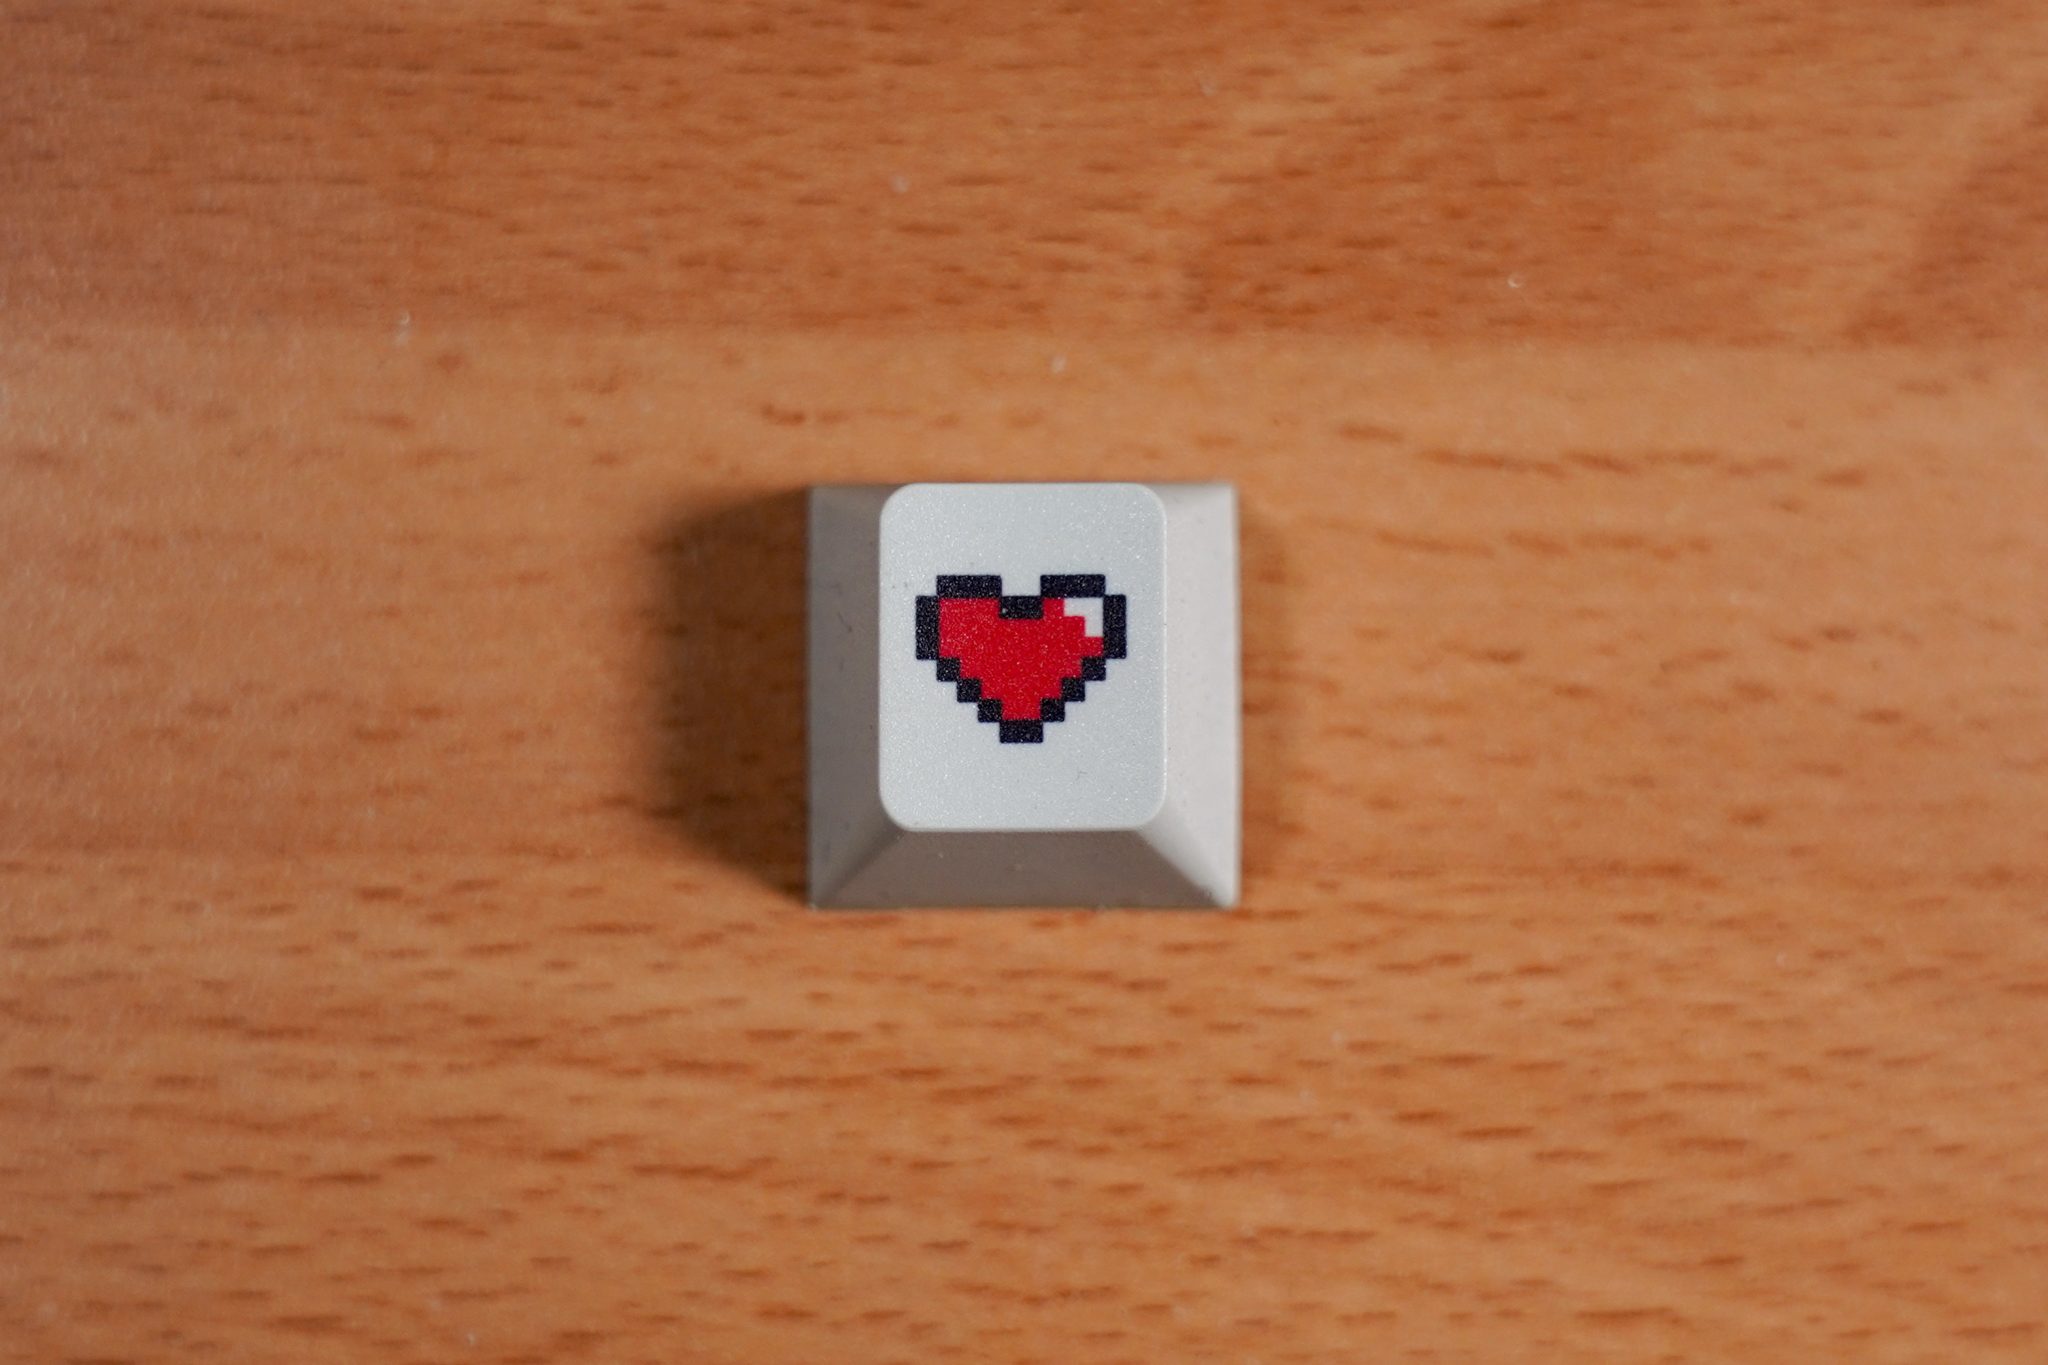 Computer key cap with a pixel-art heart on a wooden table.